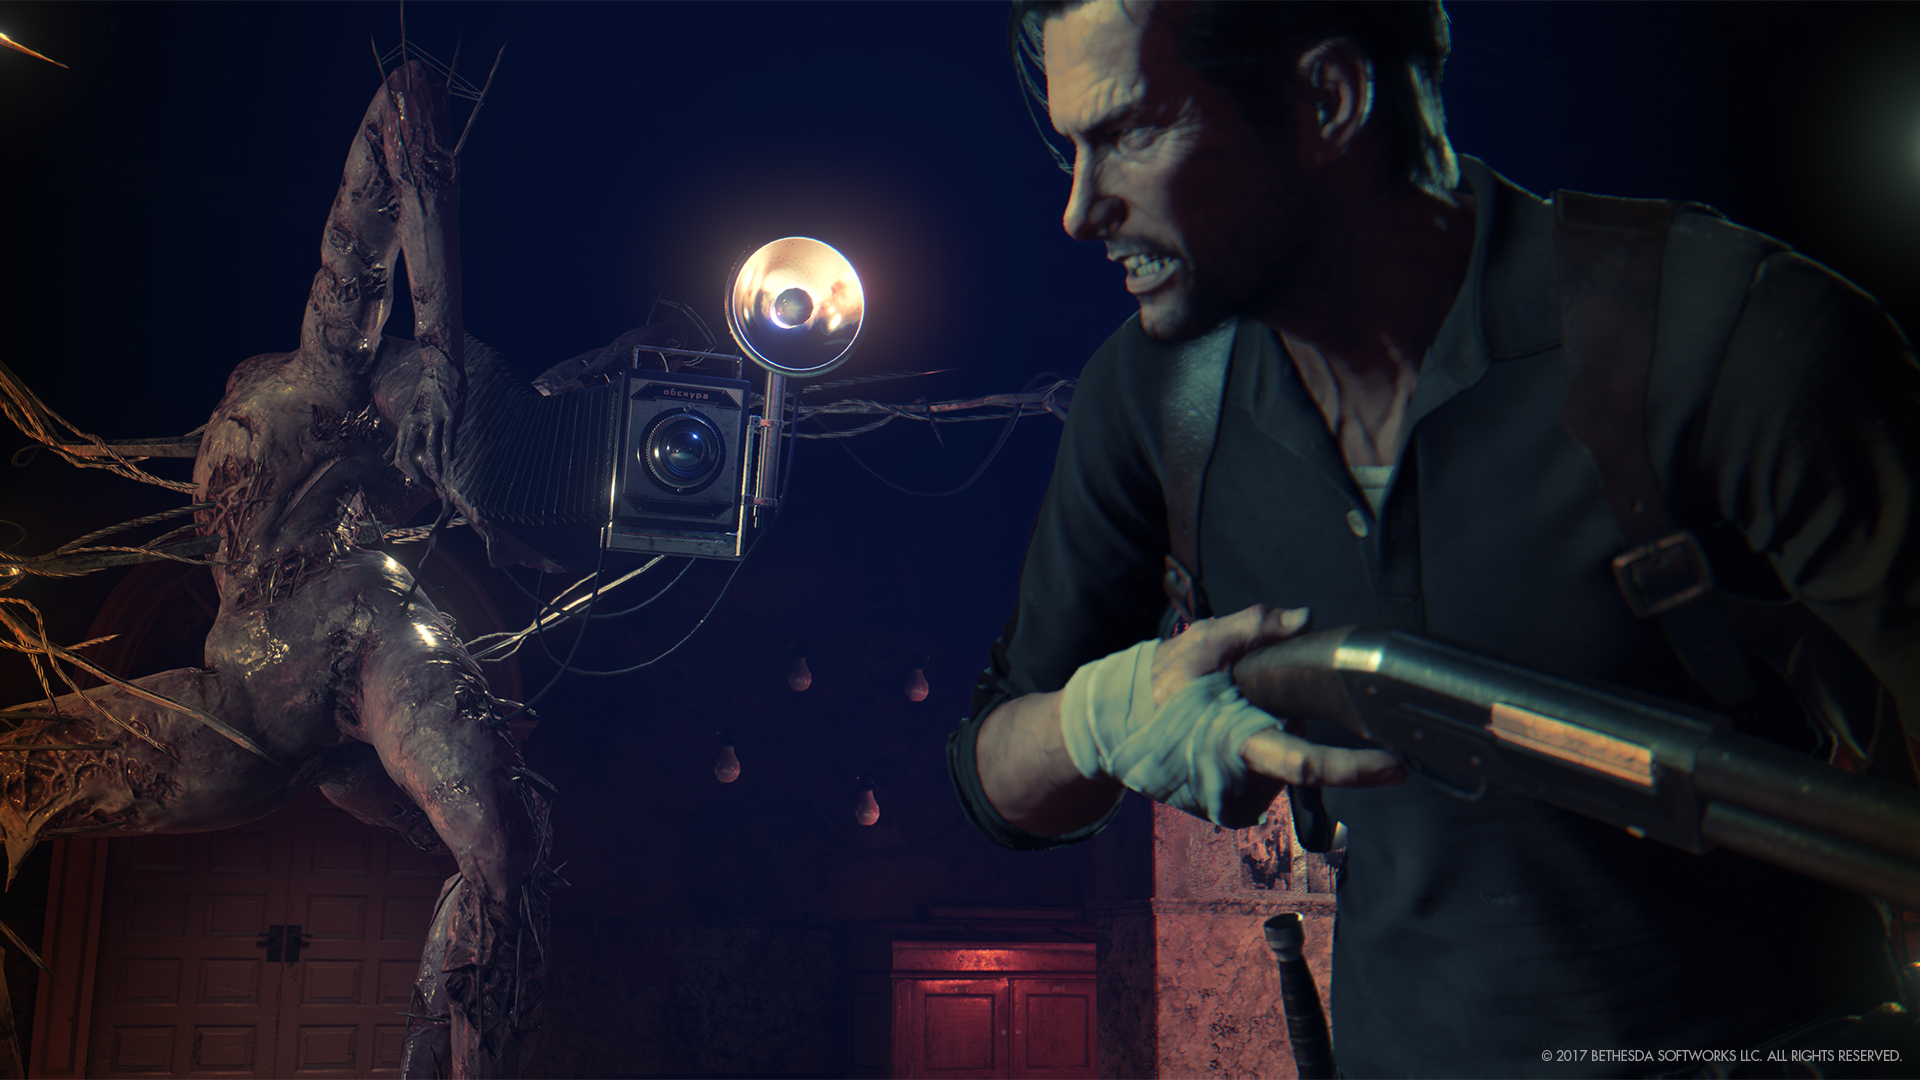 evil within 2 ps4 price